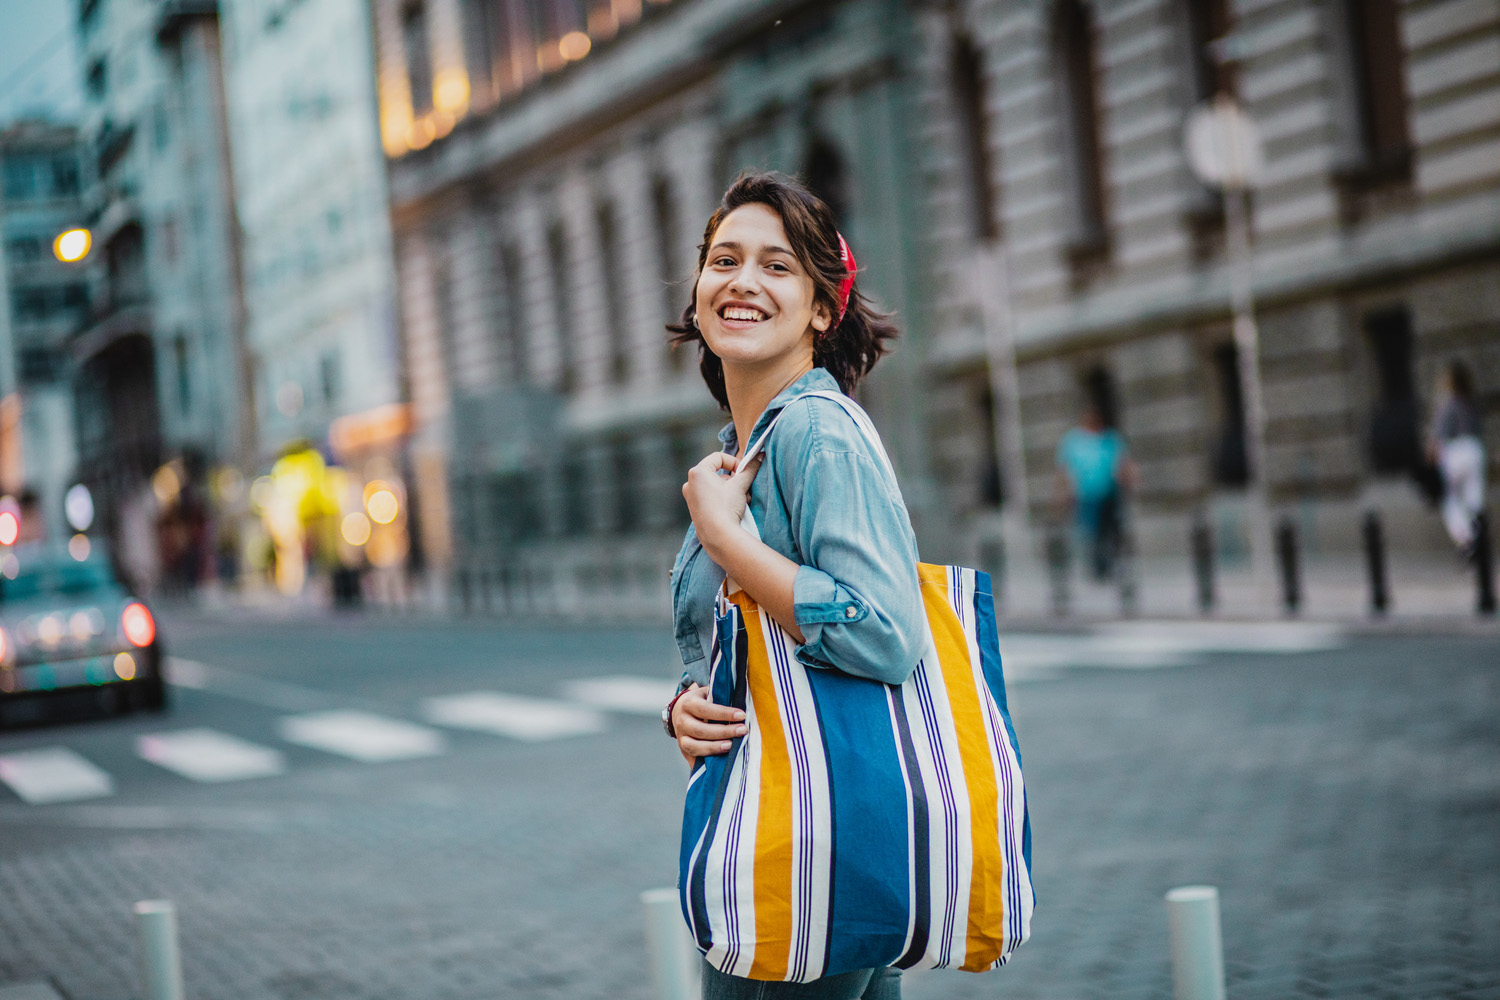 Portrait of smiling woman with reusable shopping bag